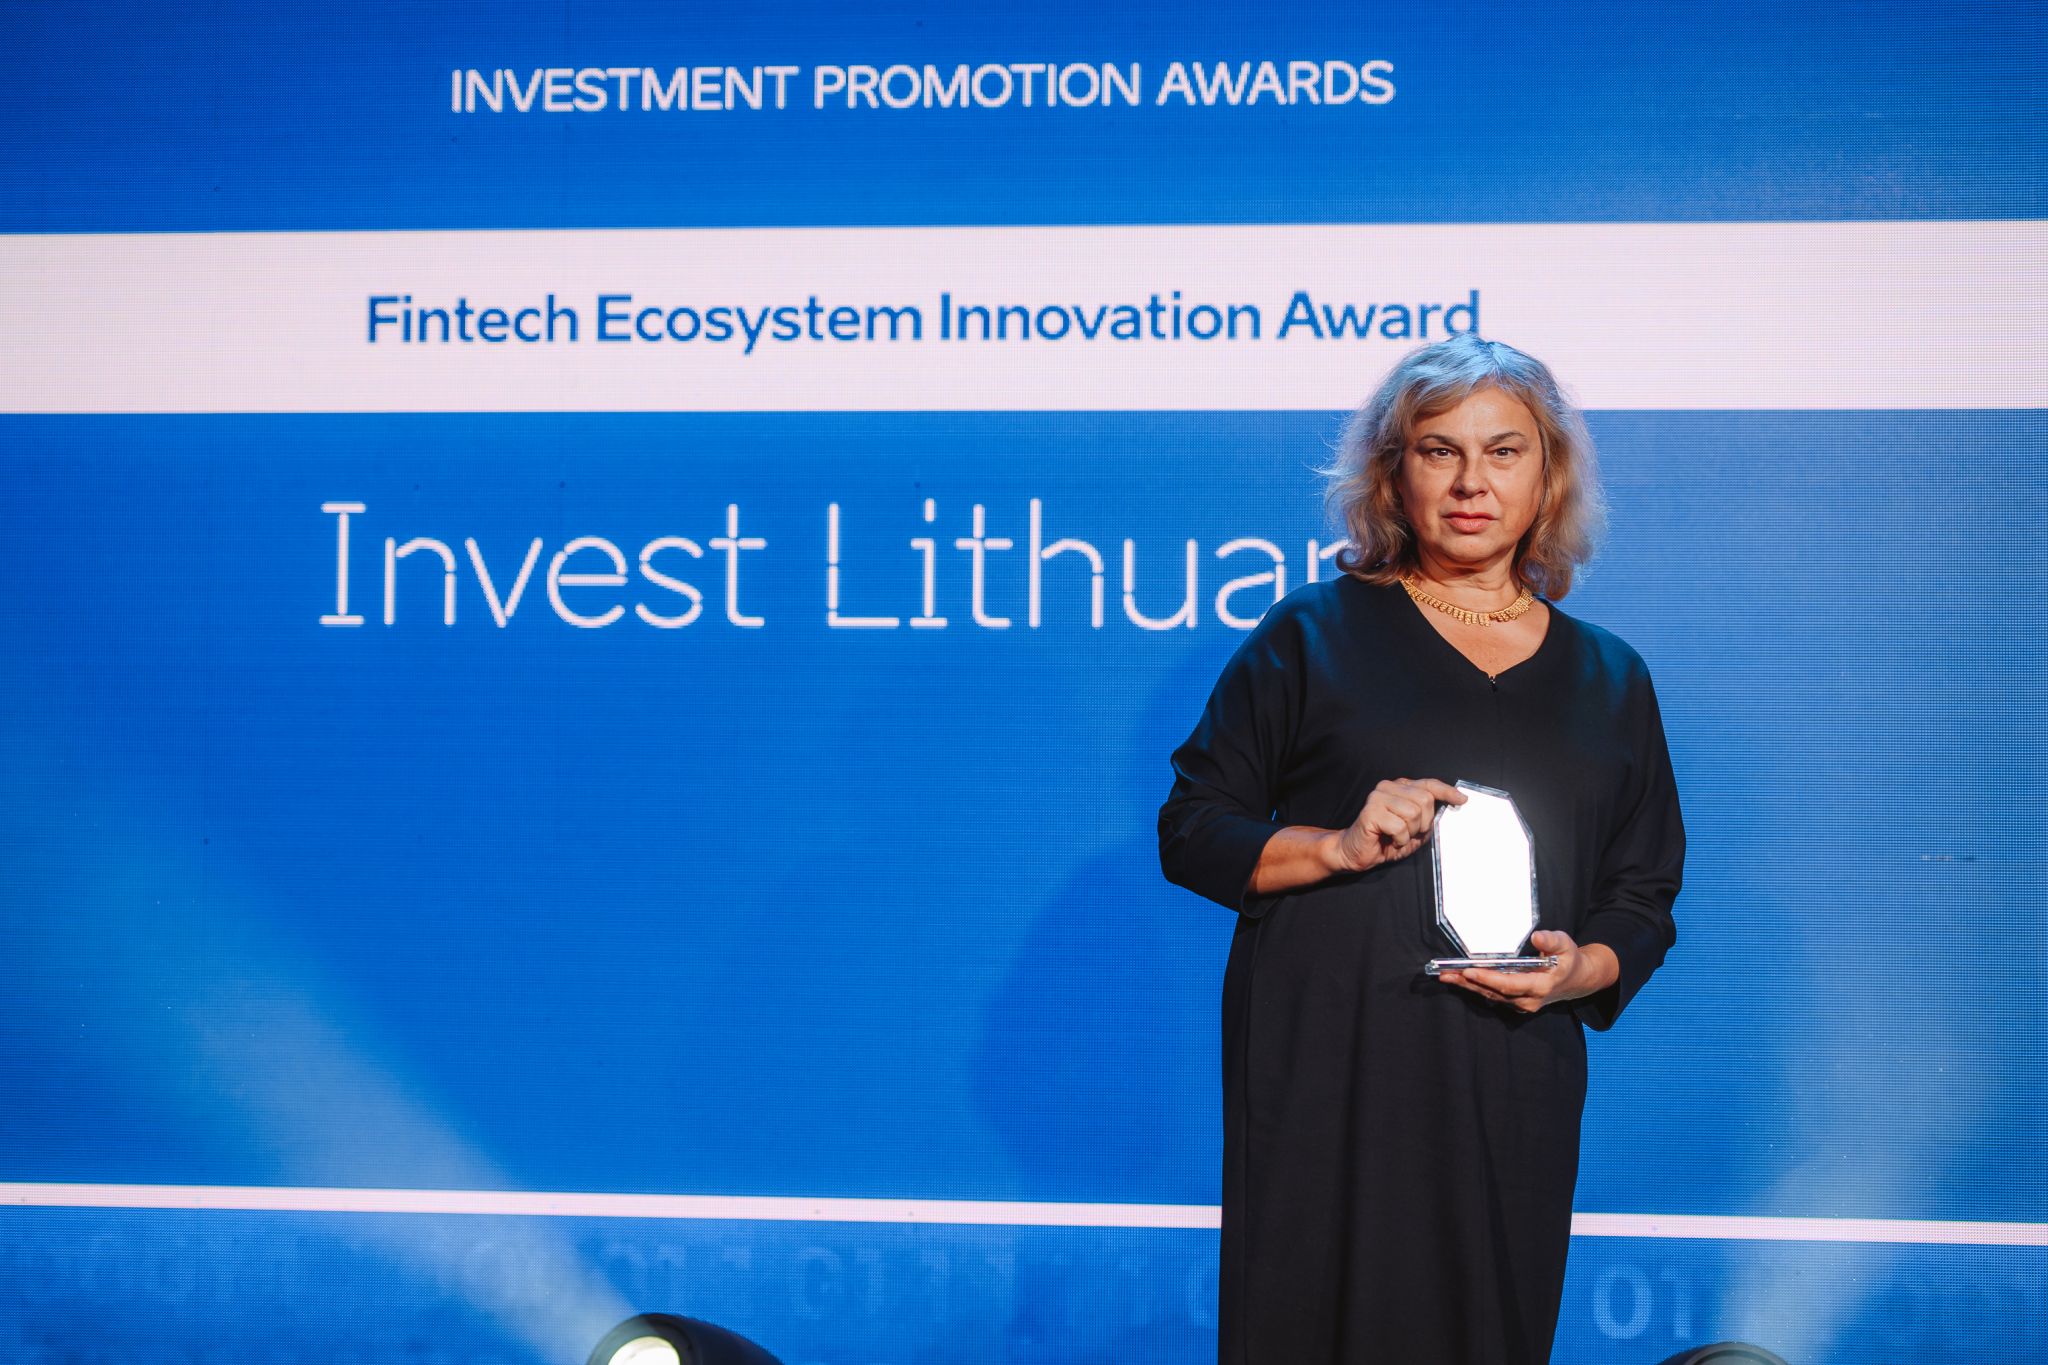 Invest Lithuania named winner of the Fintech Ecosystem Innovation Award